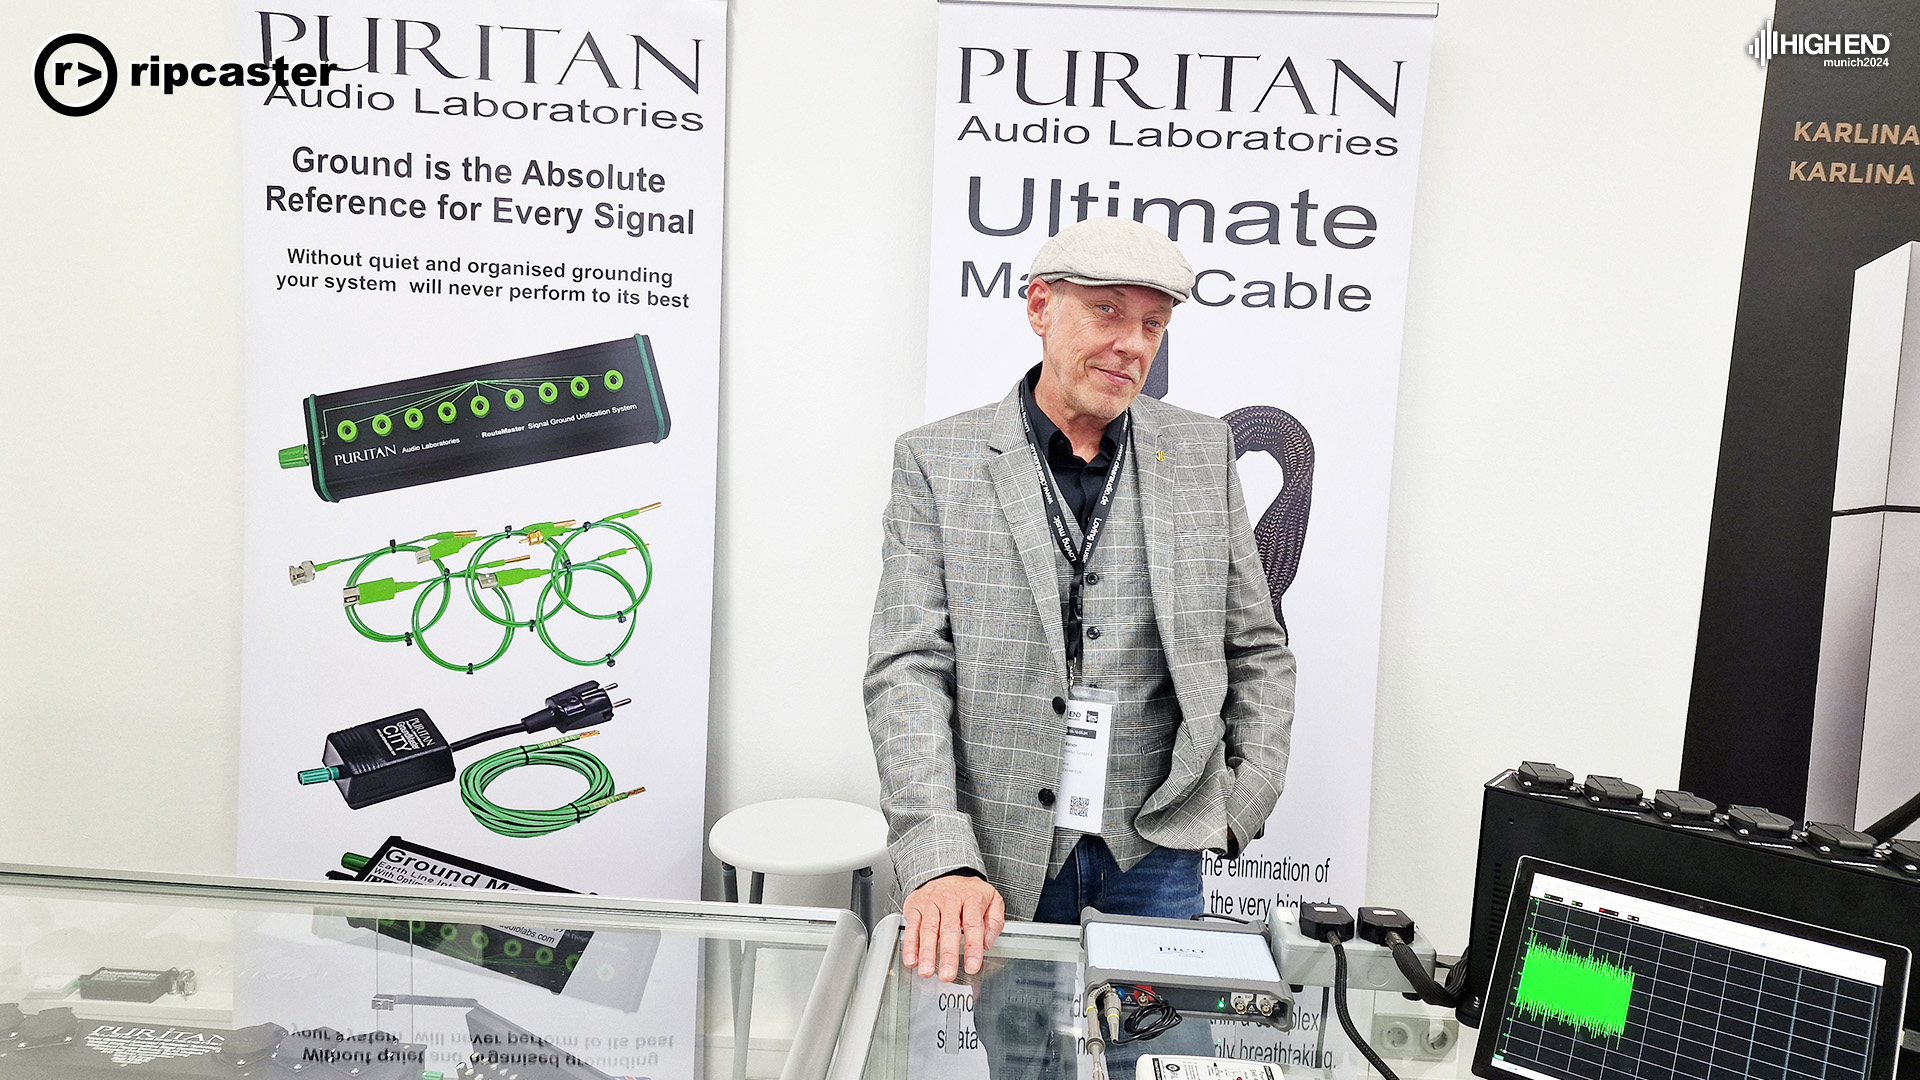 A very well dressed guy in a flat cap, waistcoat and jacket standing behind a glass cabinet at the Puritan stand.